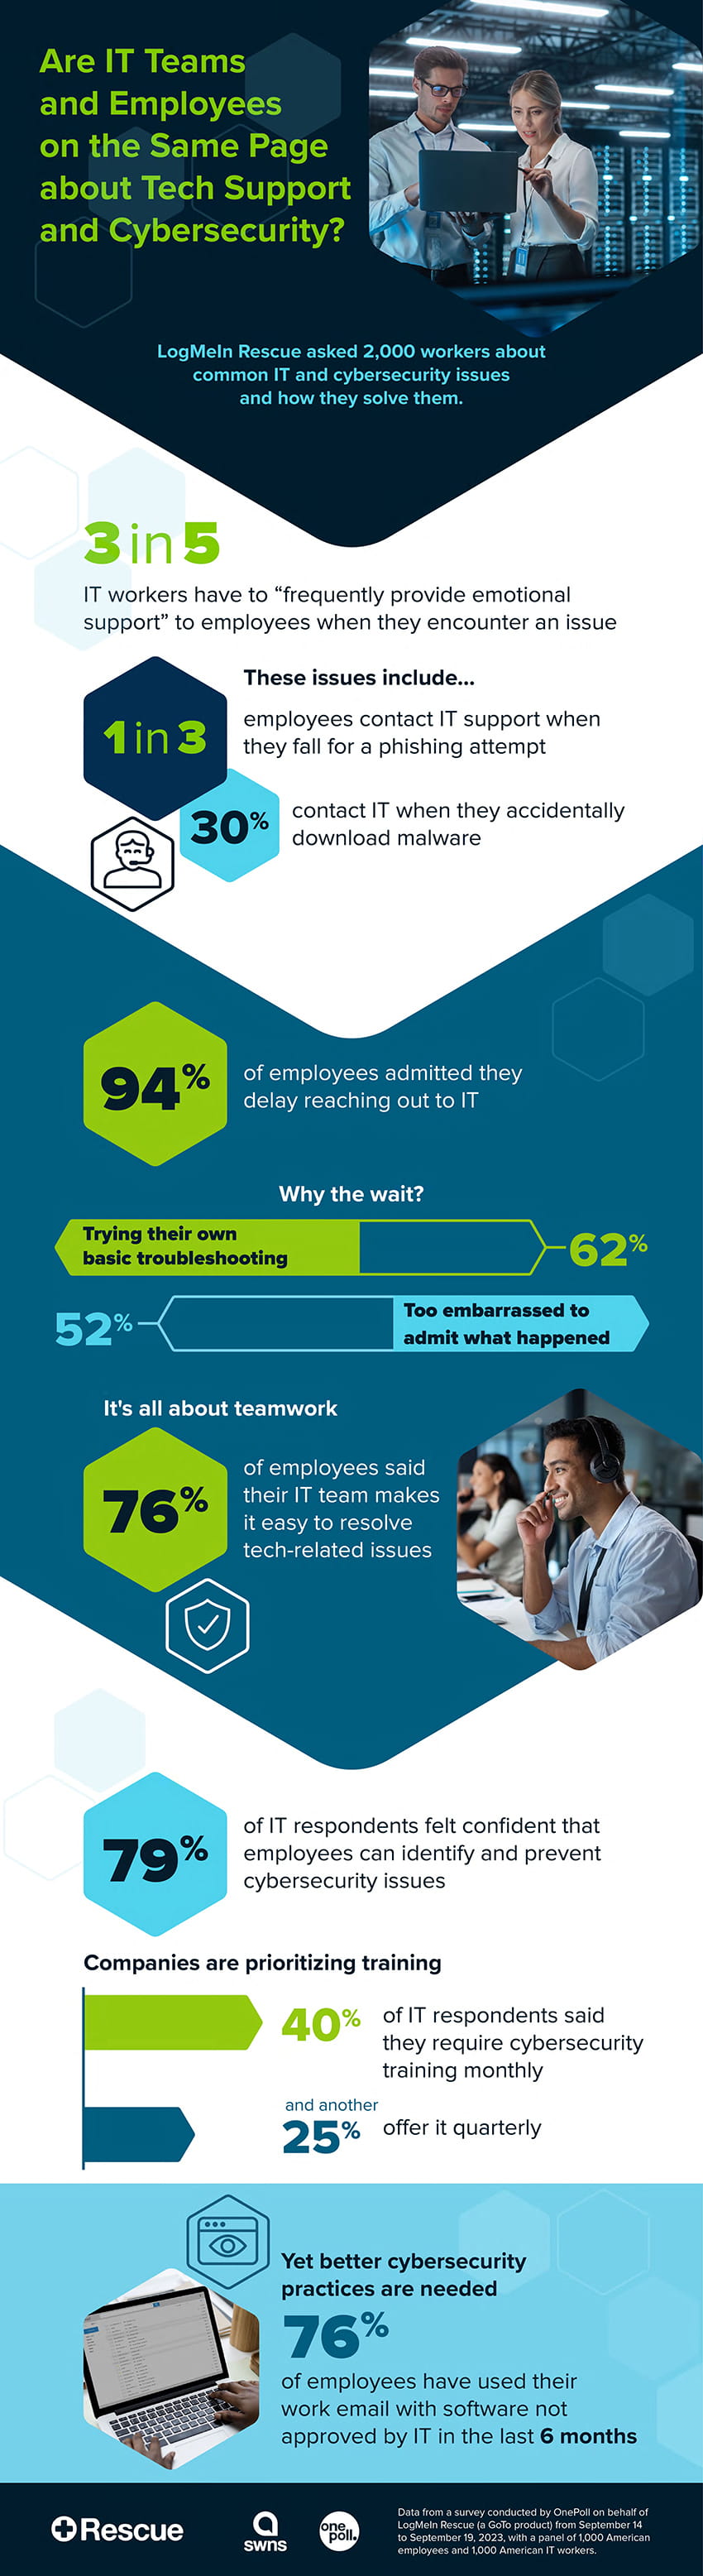 Infographic asking if IT Teams and Employees are on the same page about Tech Support and Cybersecurity. Click to open pdf.